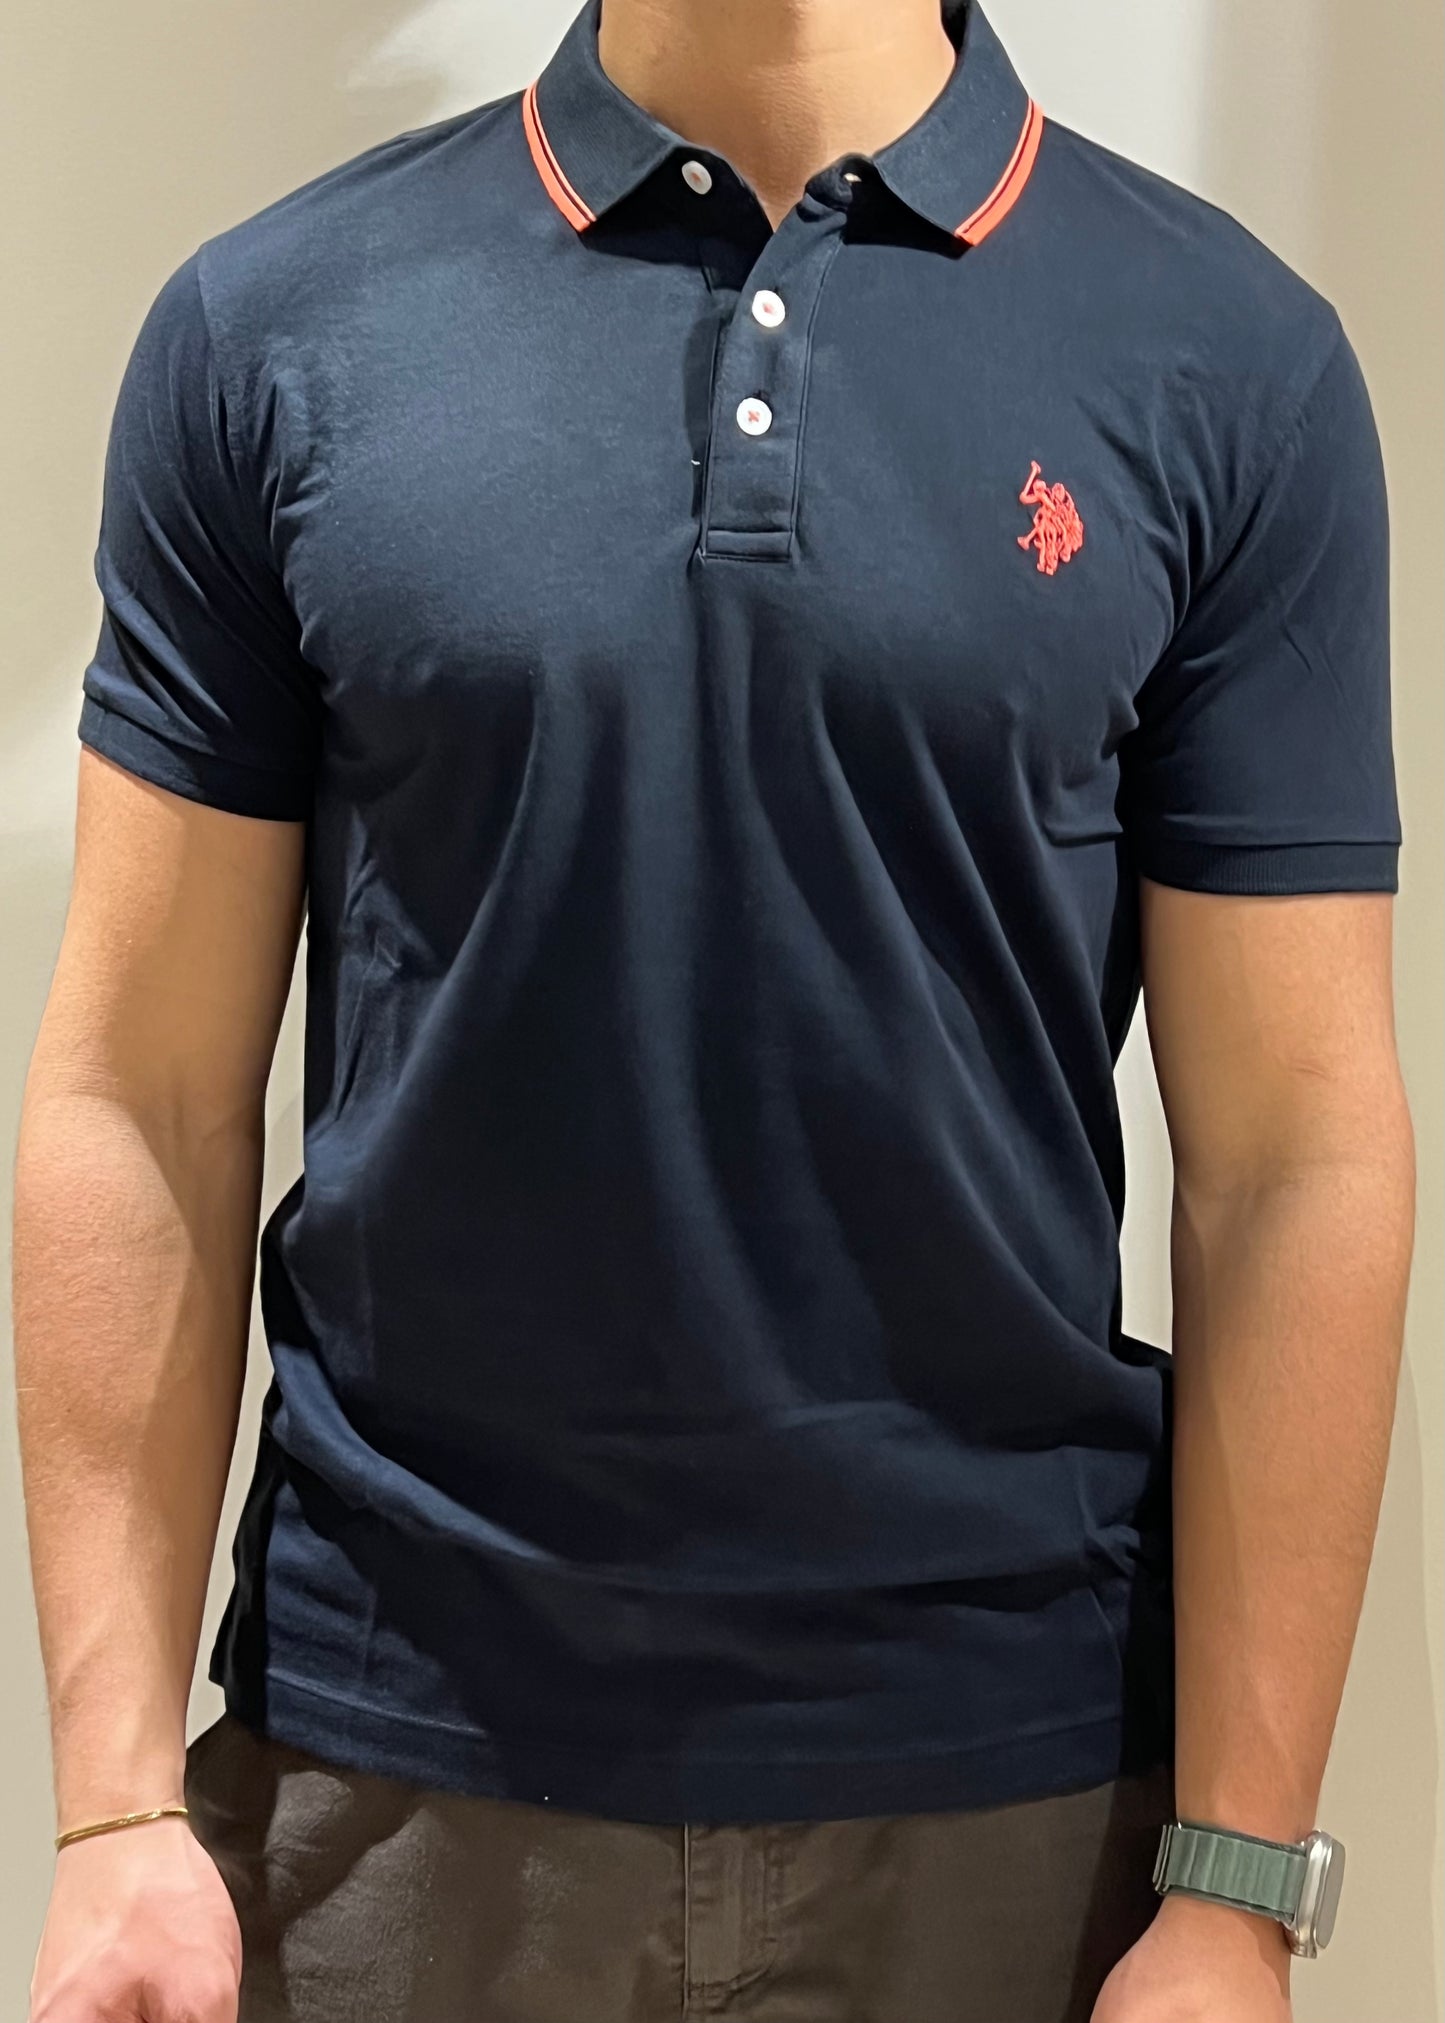 US POLO ASSN. SHORT SLEEVED POLO SHIRT IN BLACK BARR JERSEY SS23